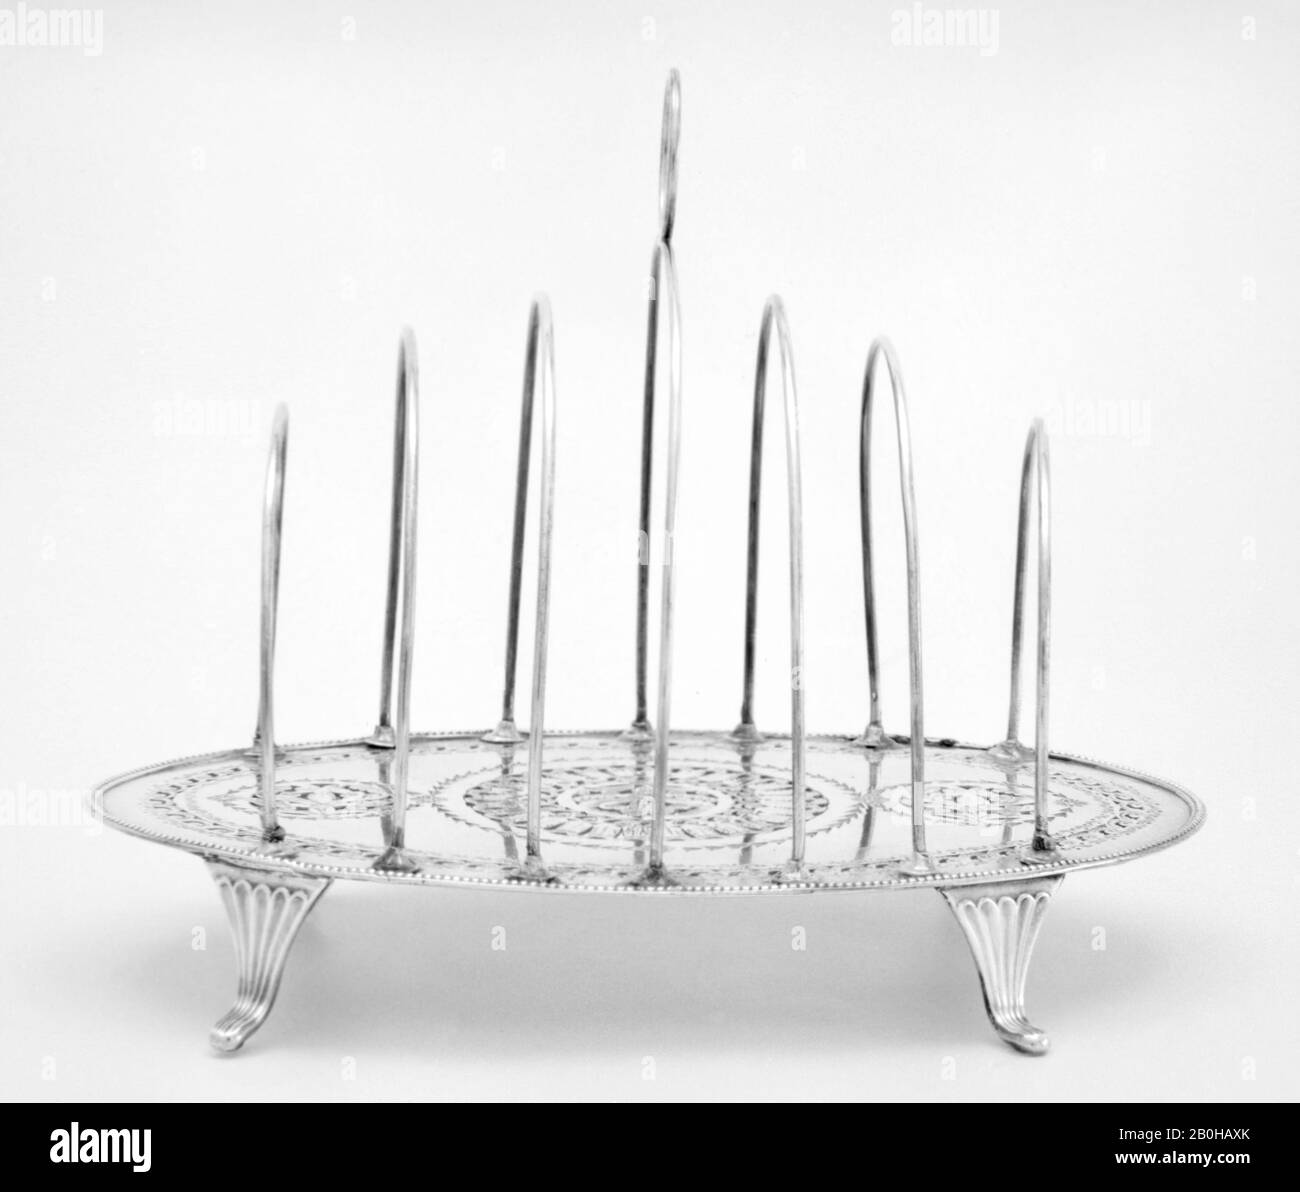 N. Smith and Company, rack Toast, Royaume-Uni, N. Smith and Company, CA. 1784, britannique, plaque de Sheffield, Total : 5 3/4 × 7 1/4 × 4 7/8 po. (14,6 × 18,4 × 12,4 cm), Métal-Silverplate Banque D'Images